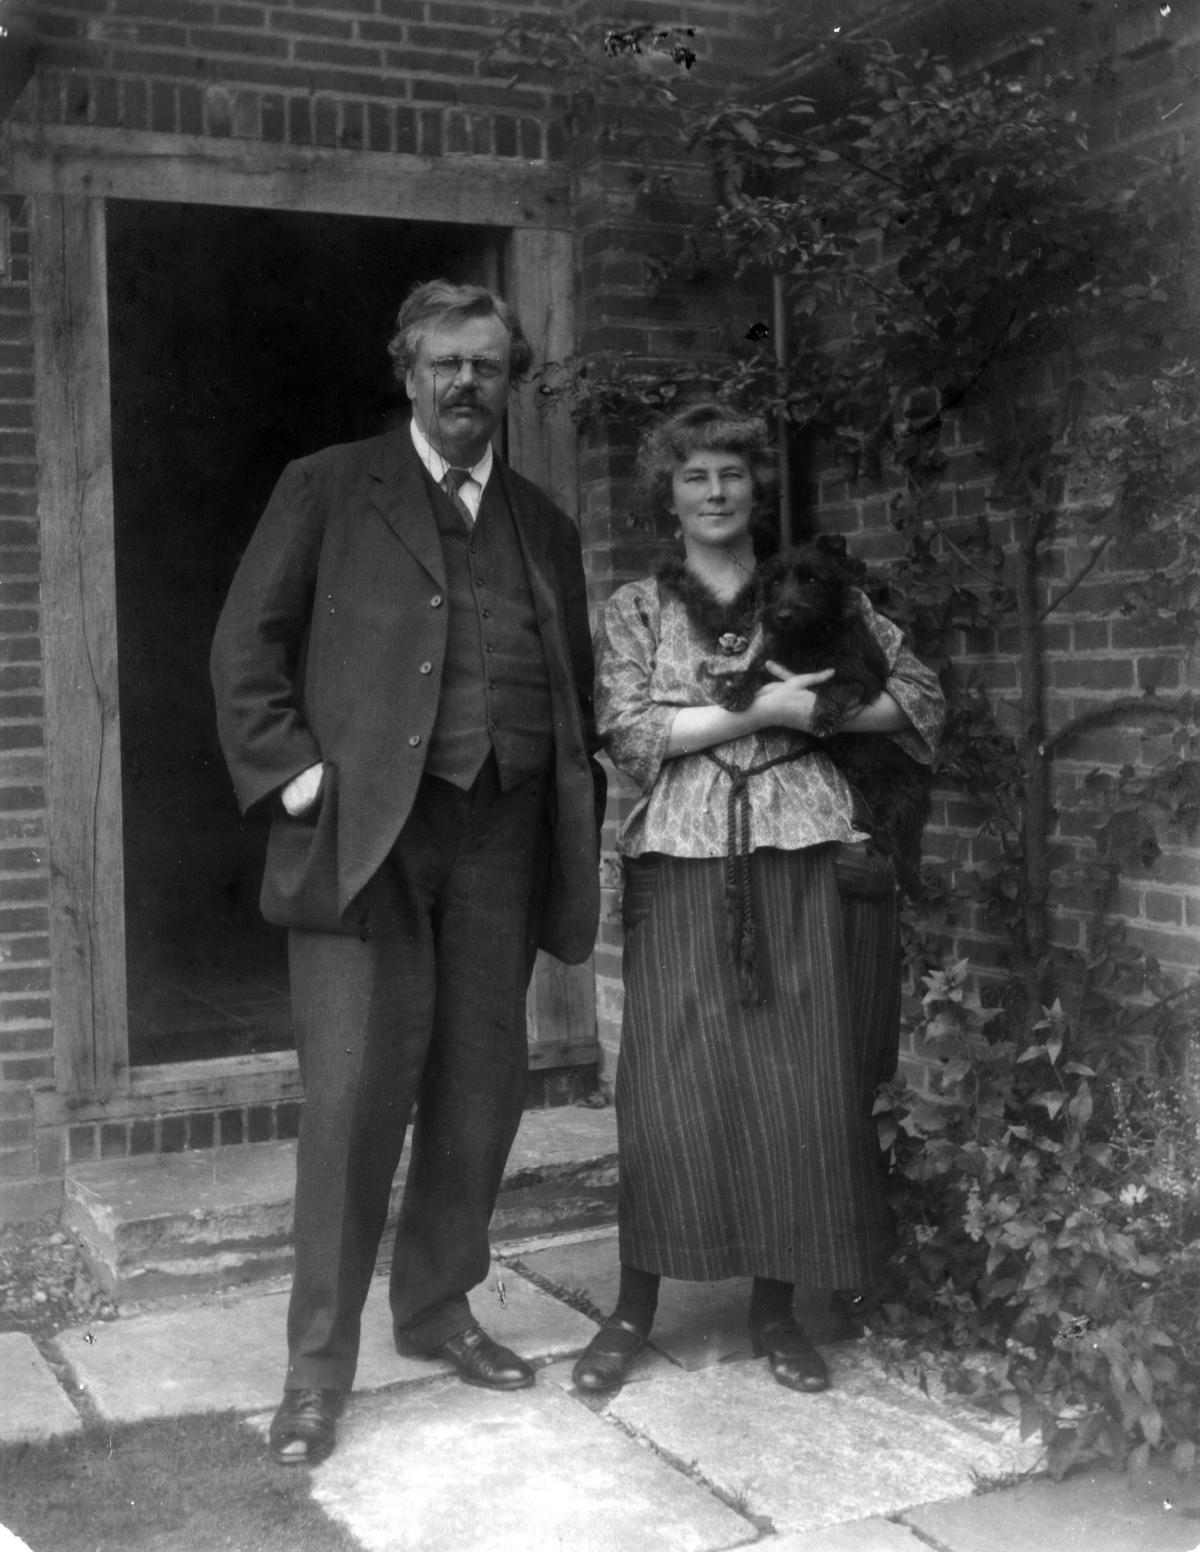 G.K. Chesterton and his beloved wife, Frances. (Courtesy of the Chesterton Society)